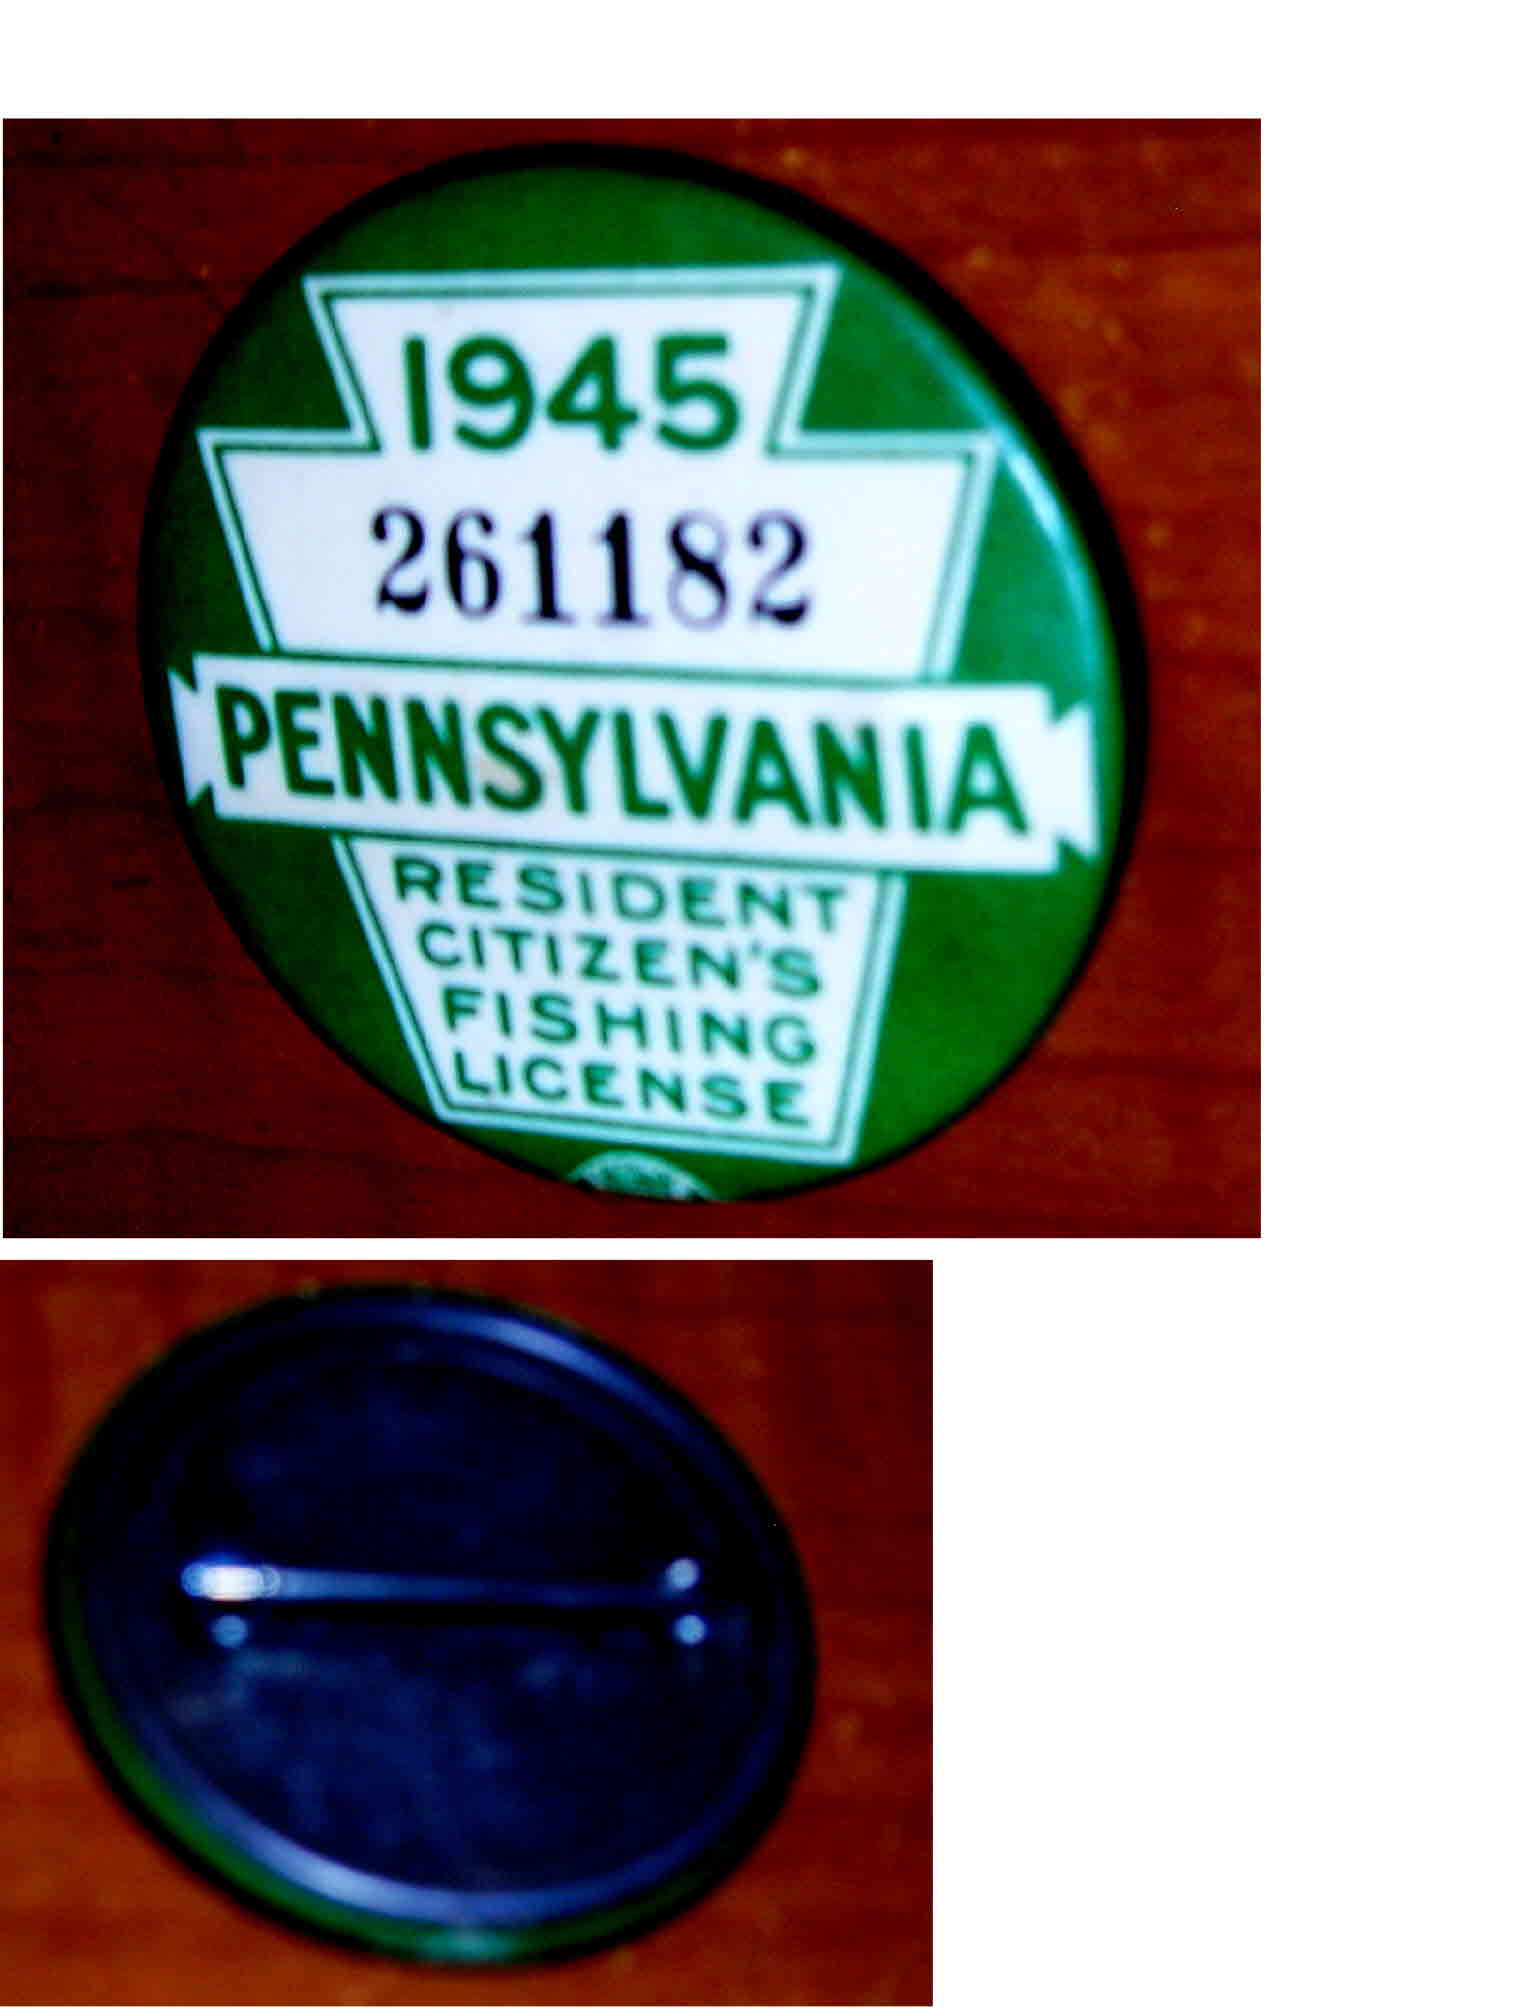 Display Board With PA Resident Fishing Licenses 1923, 1925-1959